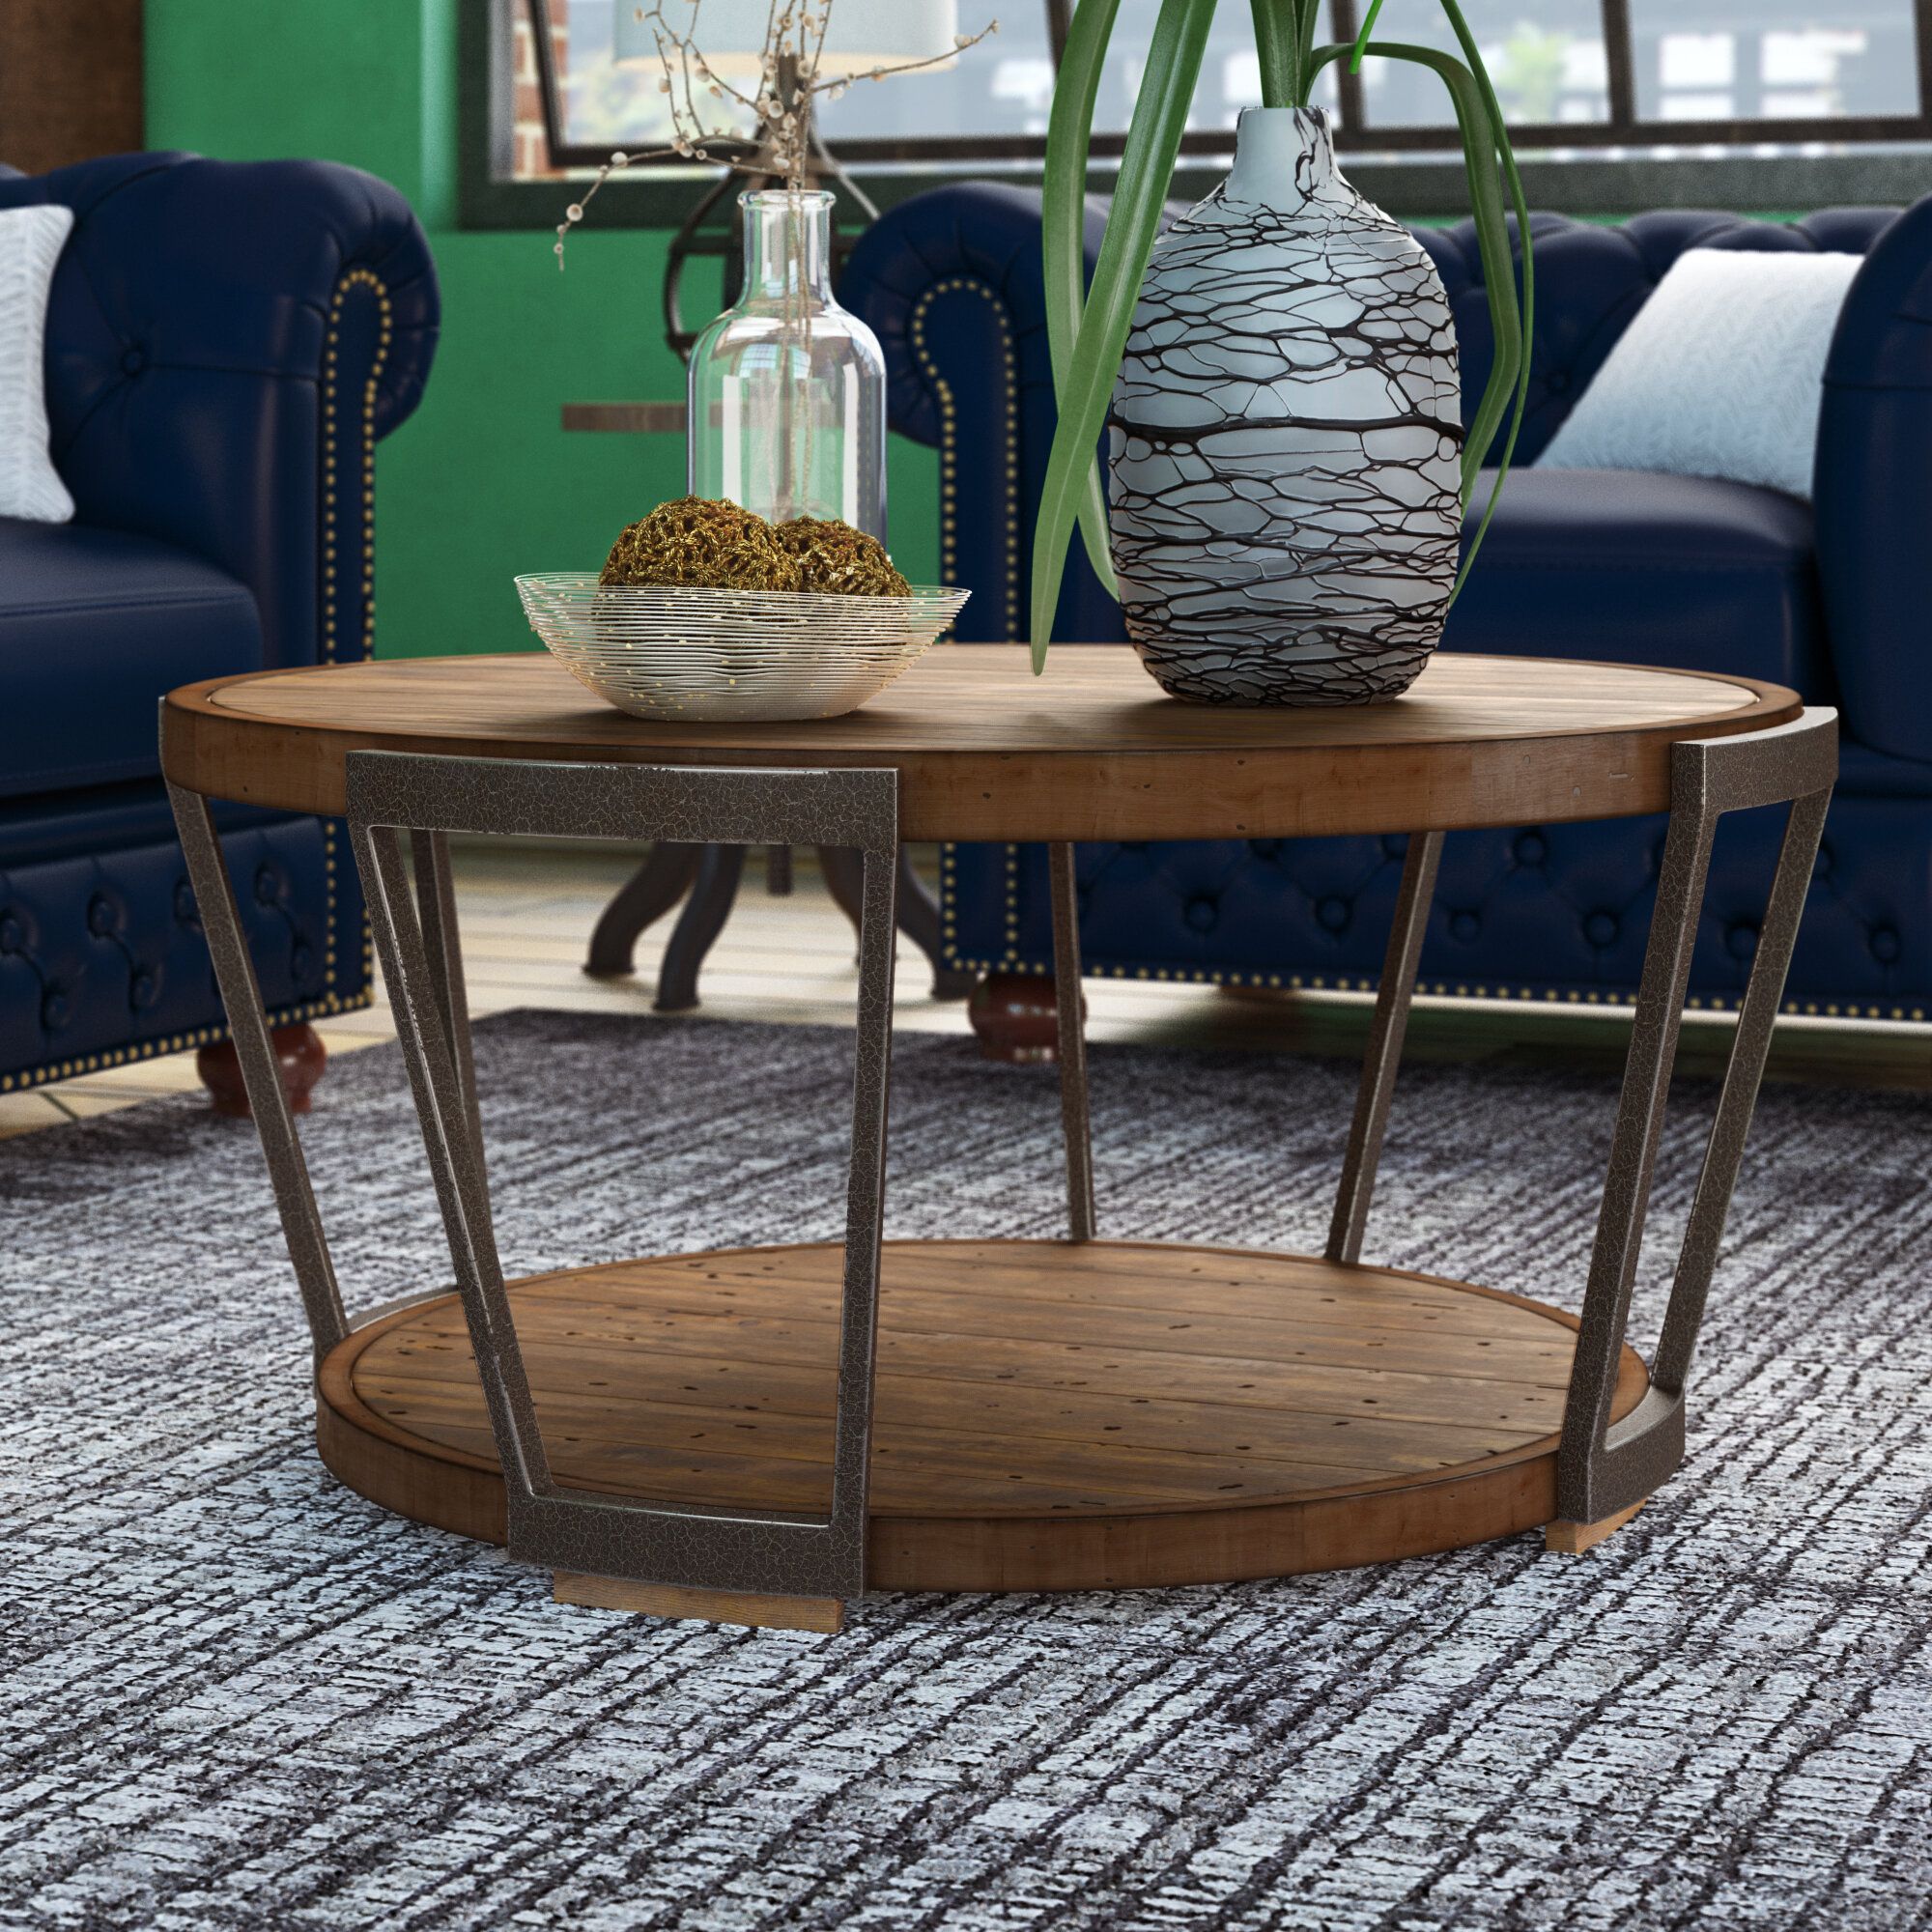 Wayfair | Round Rustic / Lodge Coffee Tables You'll Love In 2022 Intended For Rustic Round Coffee Tables (View 12 of 20)